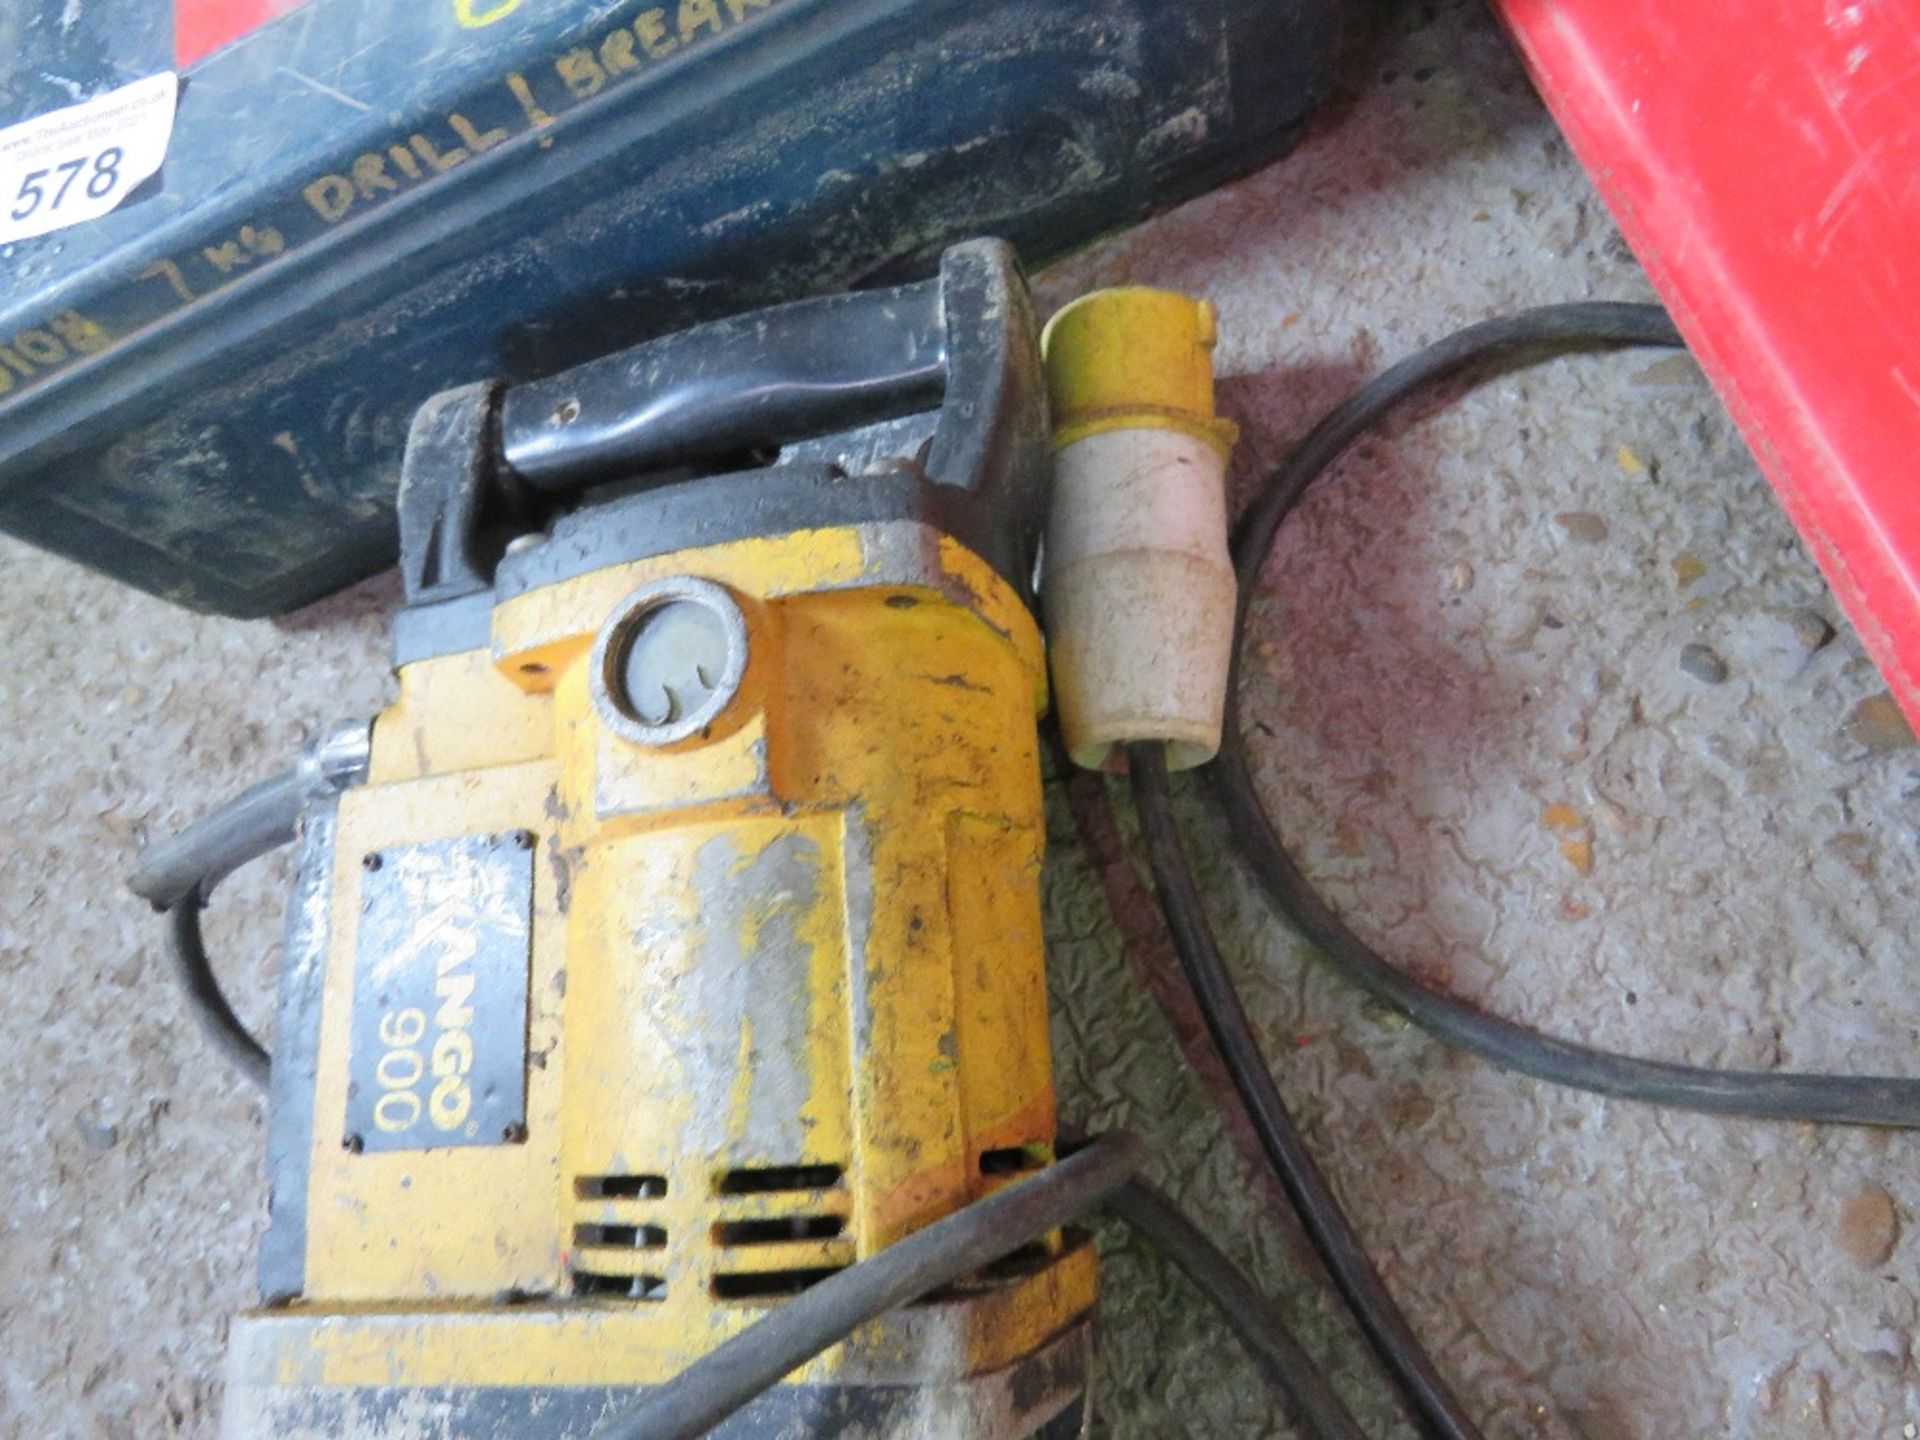 KANGO 900 BREAKER DRILL, 110VOLT POWERED. UNTESTED, CONDITION UNKNOWN. - Image 2 of 3